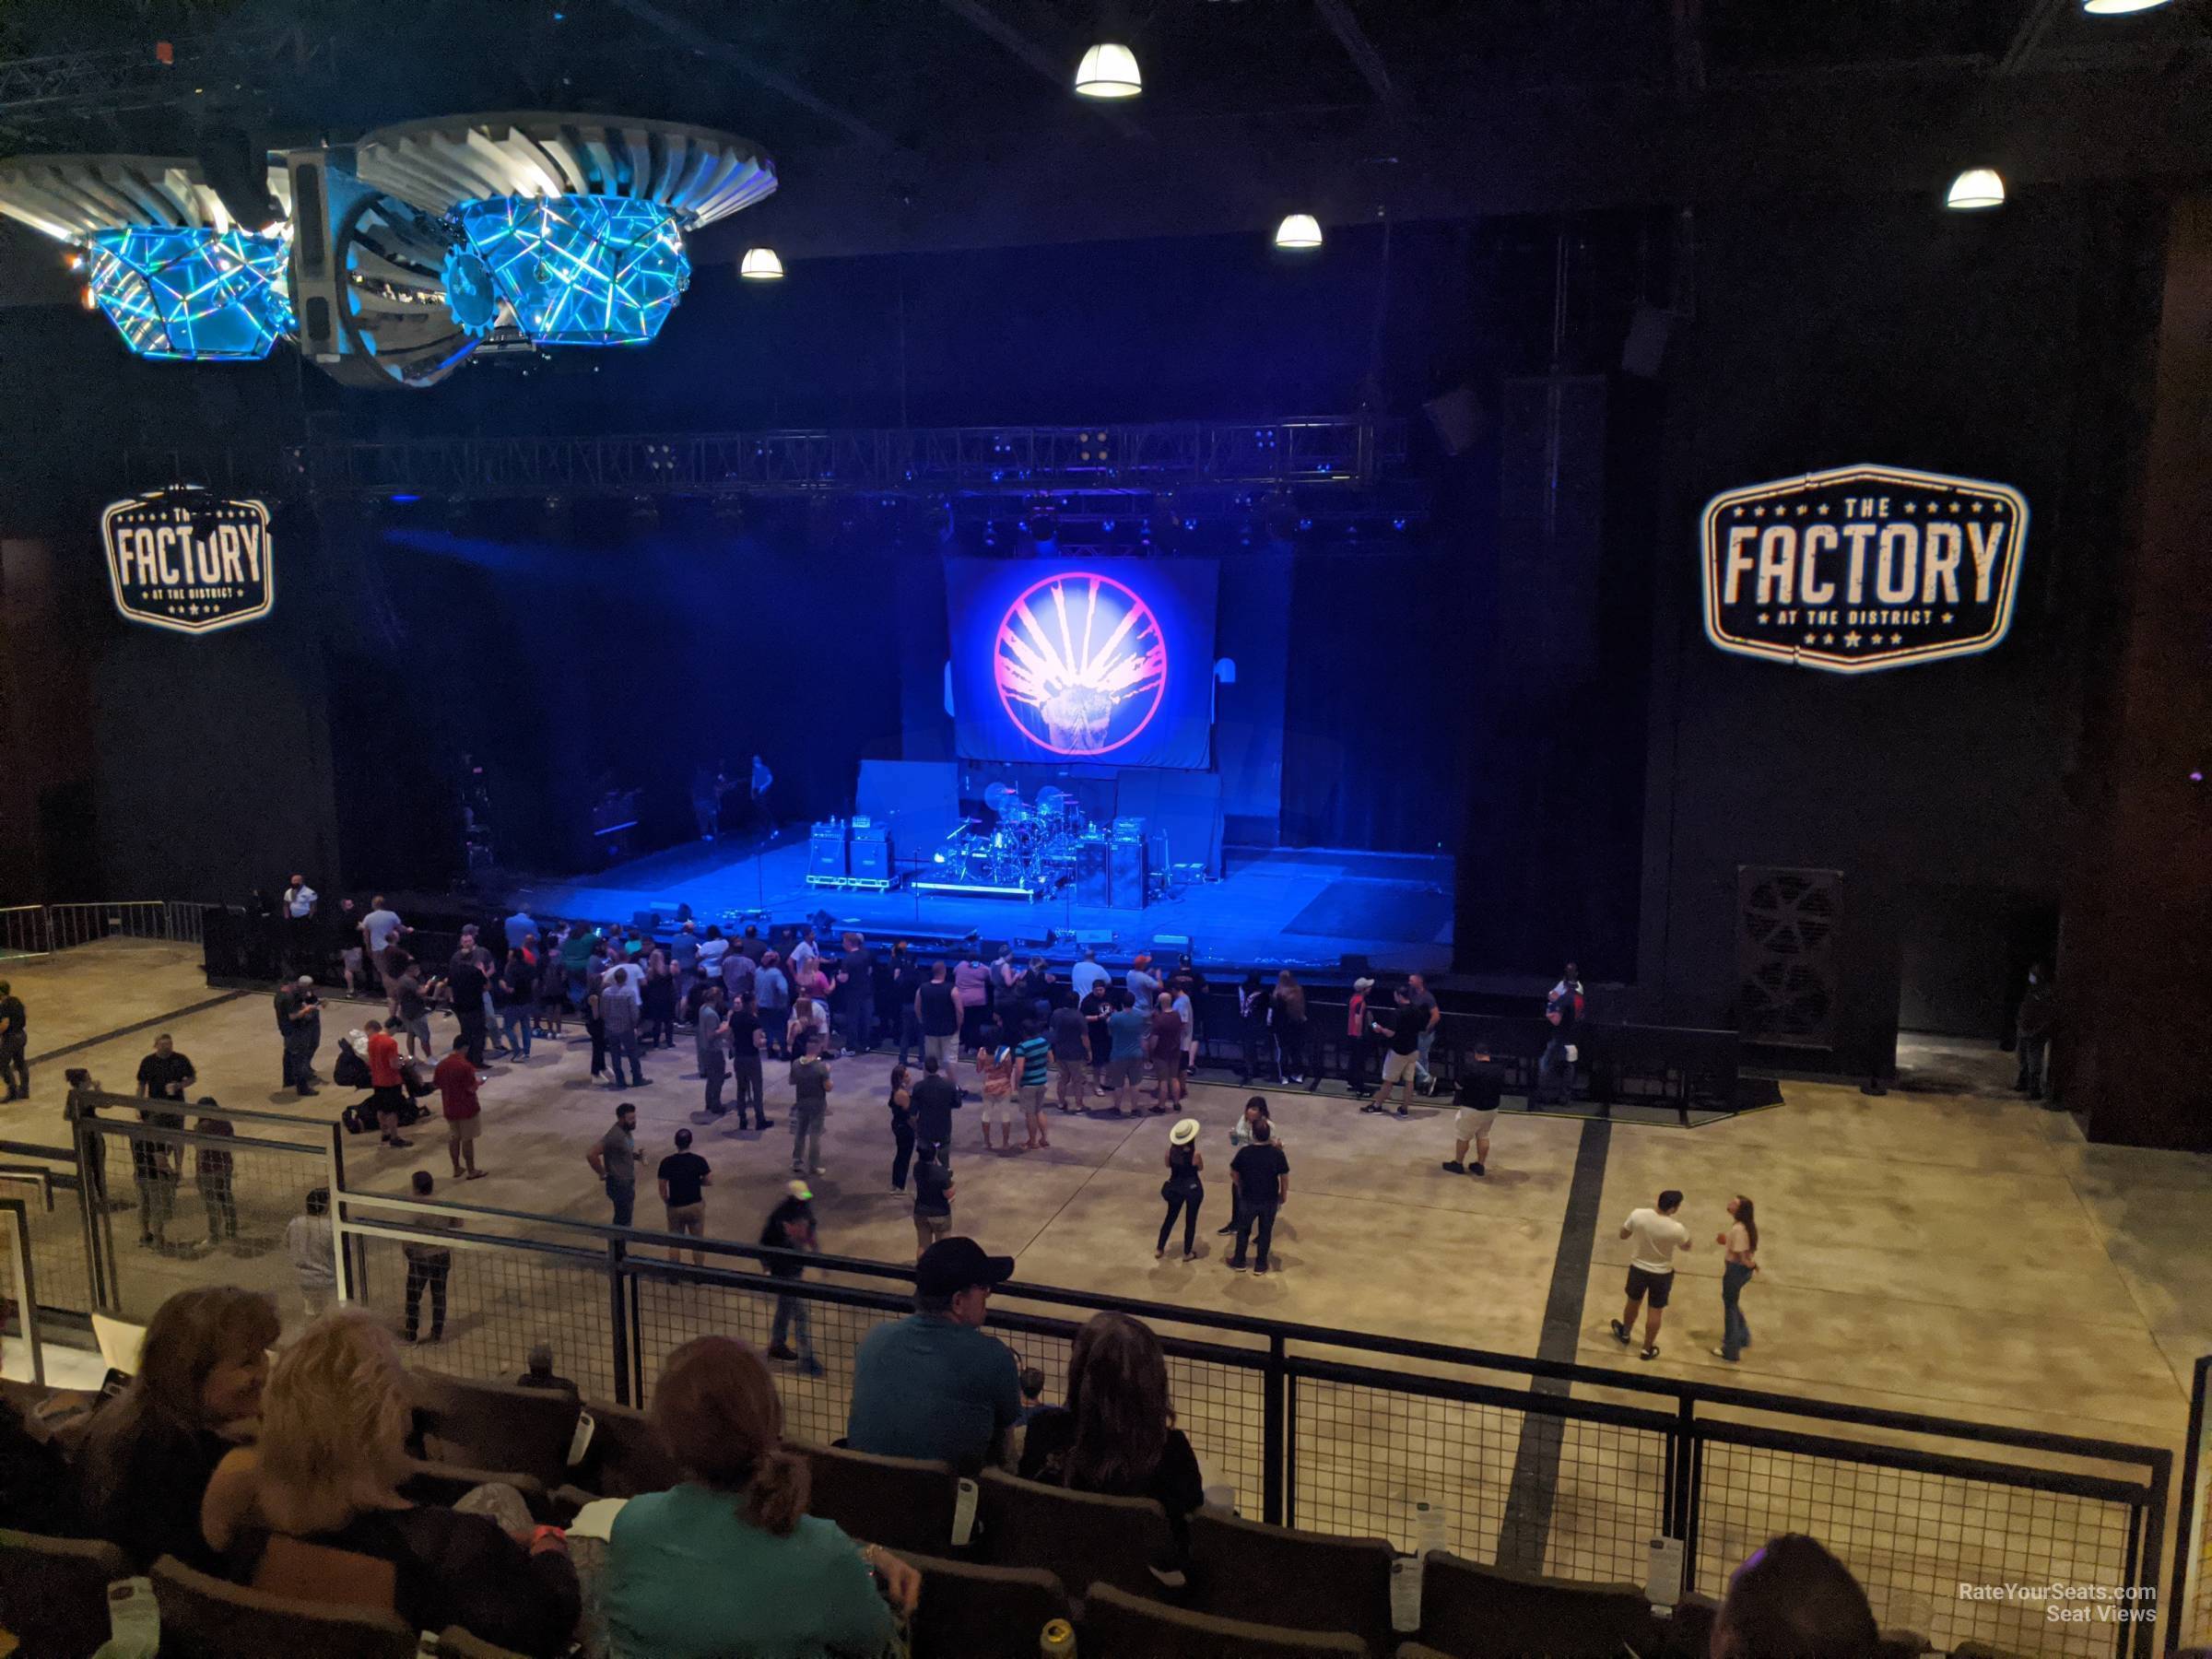 section 203, row f seat view  - the factory - stl